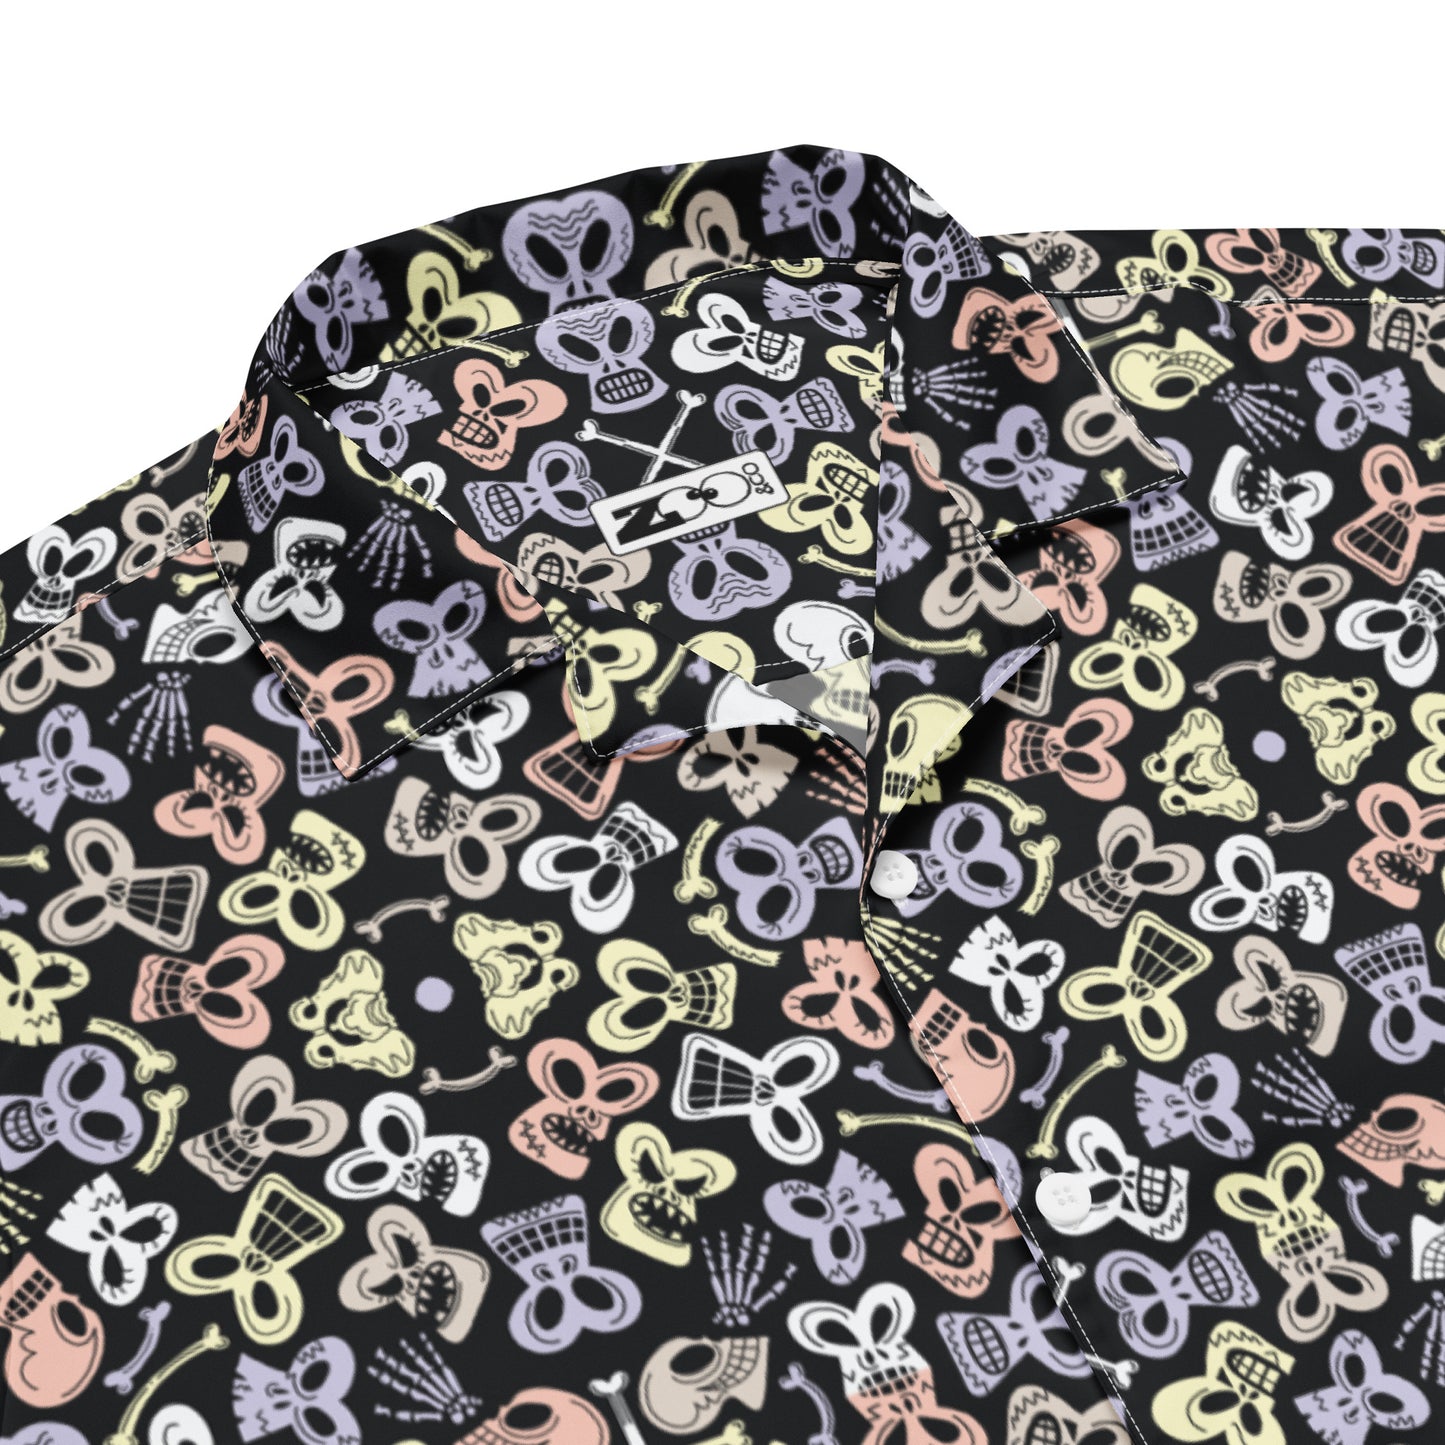 Bewitched Skulls: Hauntingly Chic Pattern Design - Unisex button shirt. Product detail